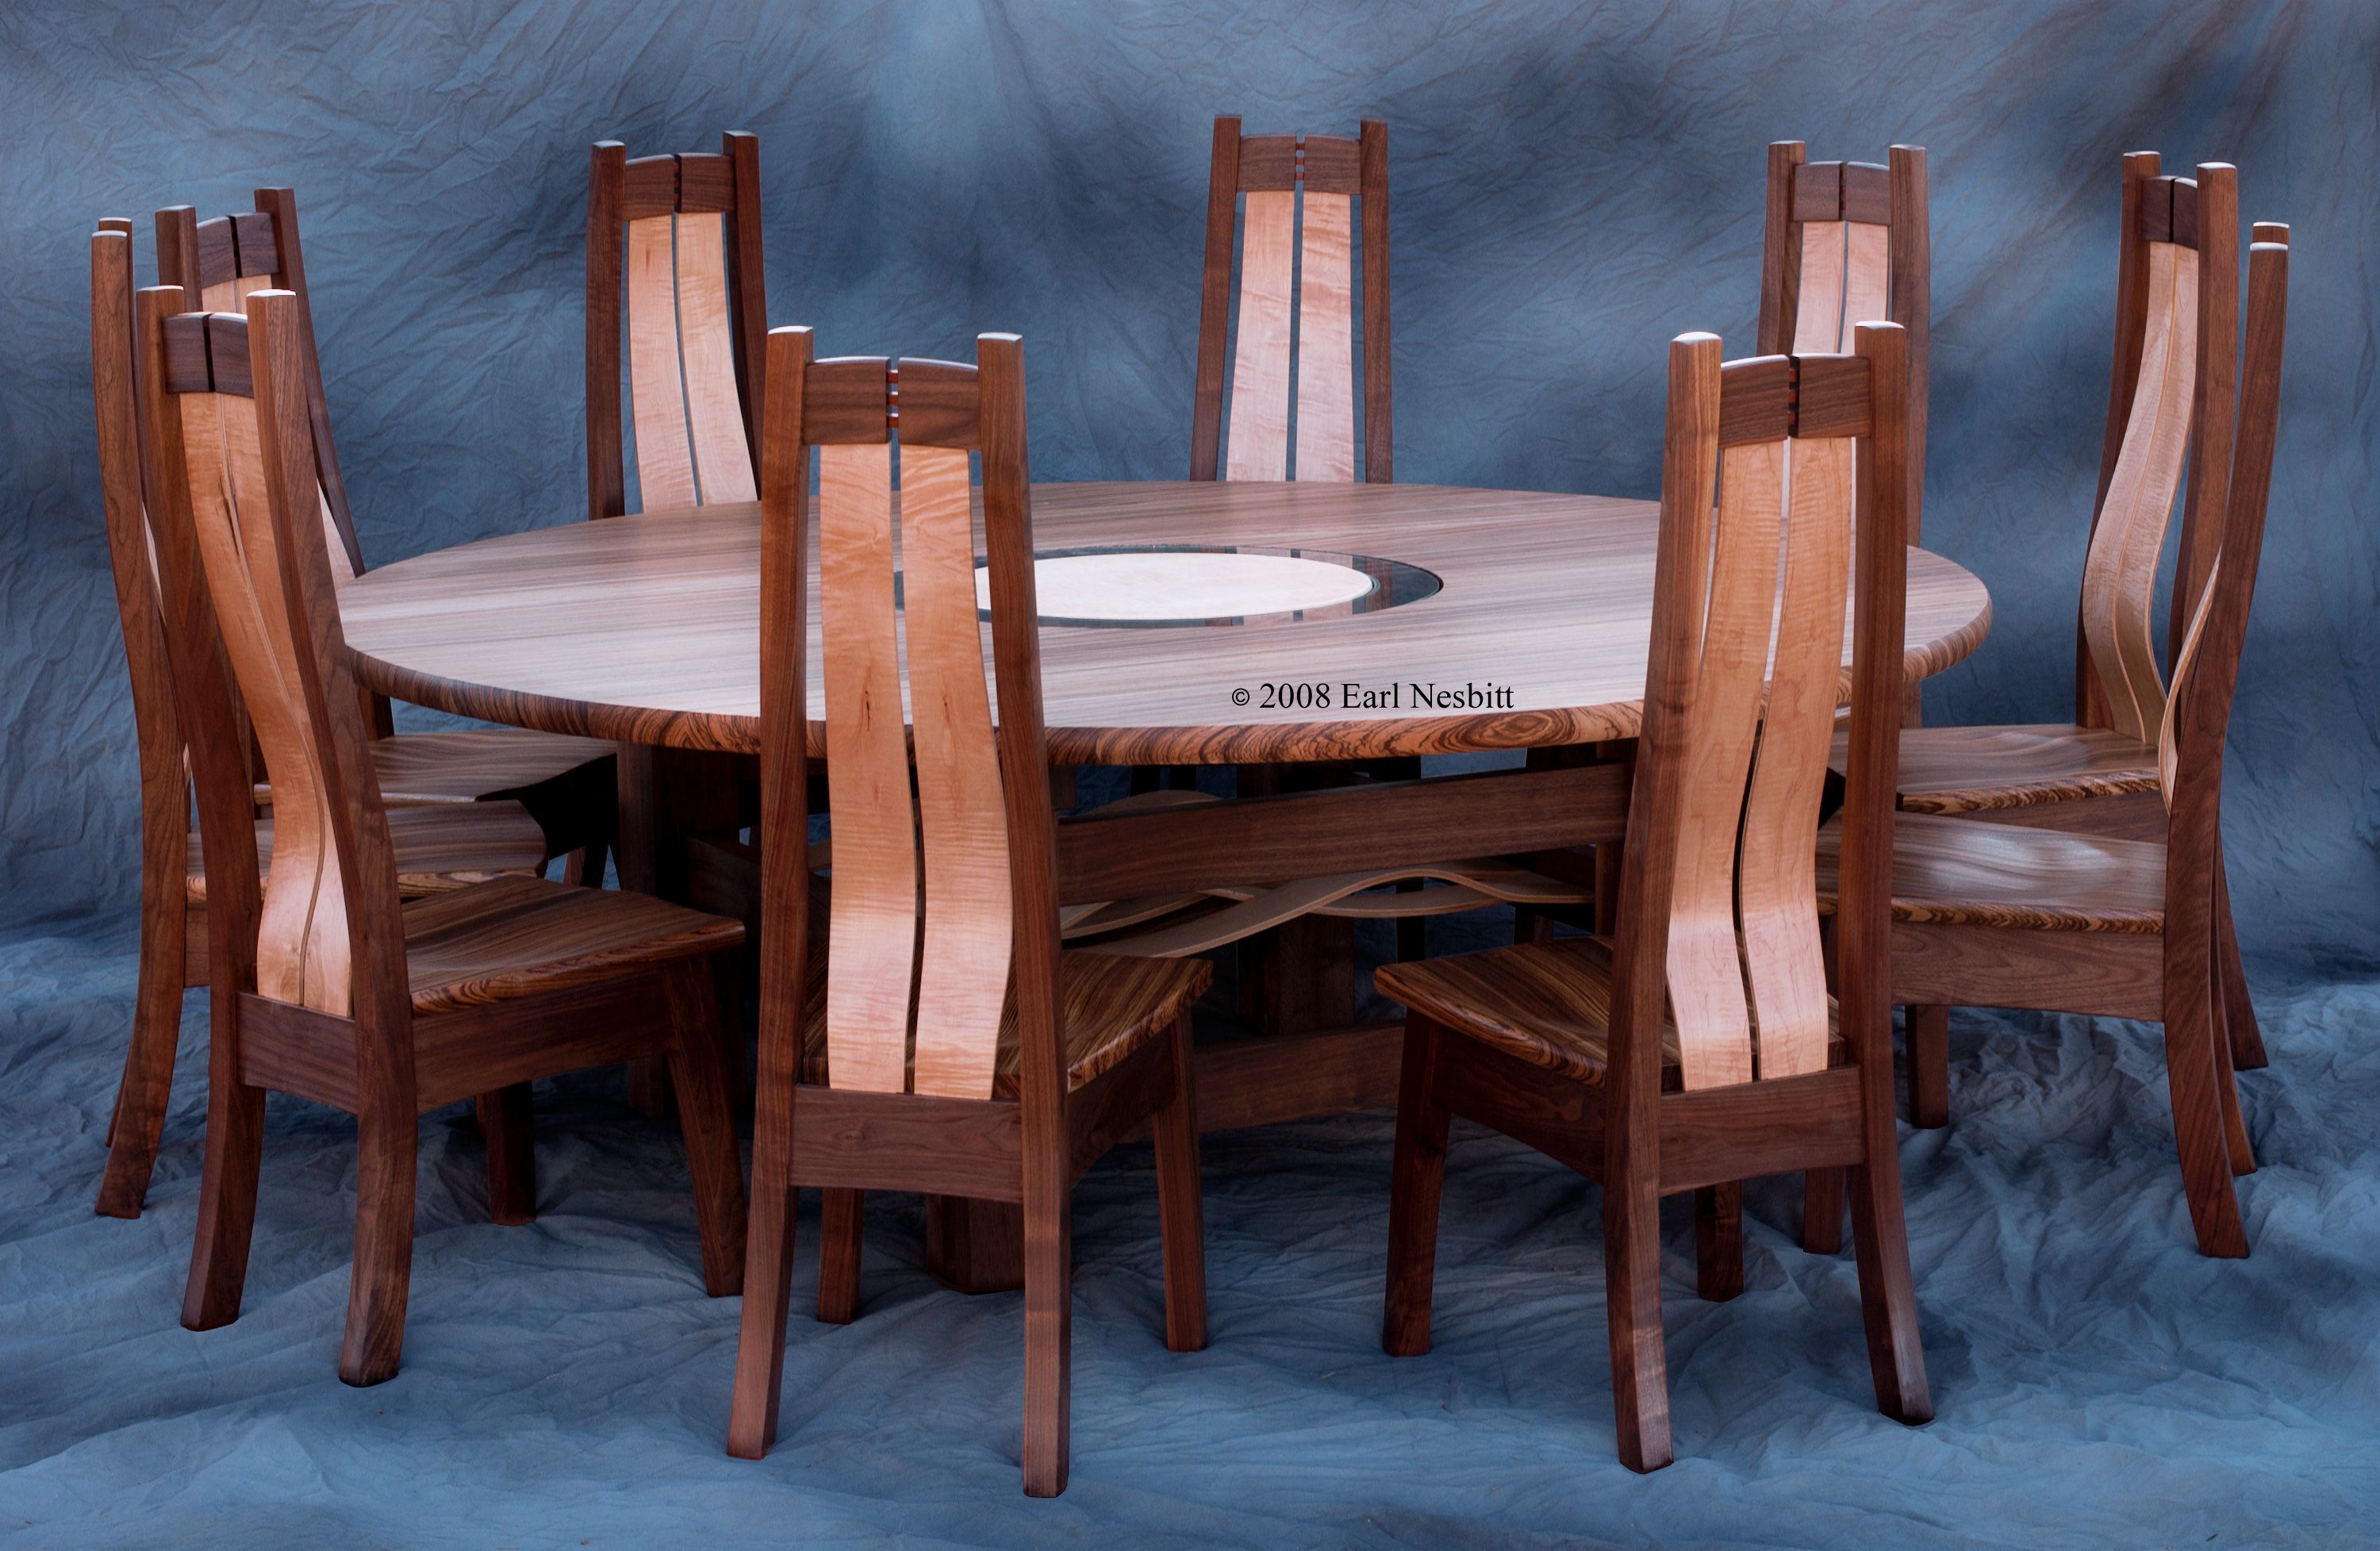 Handmade Round Dining Table Or Conference Table With 10 Chairs by Earl